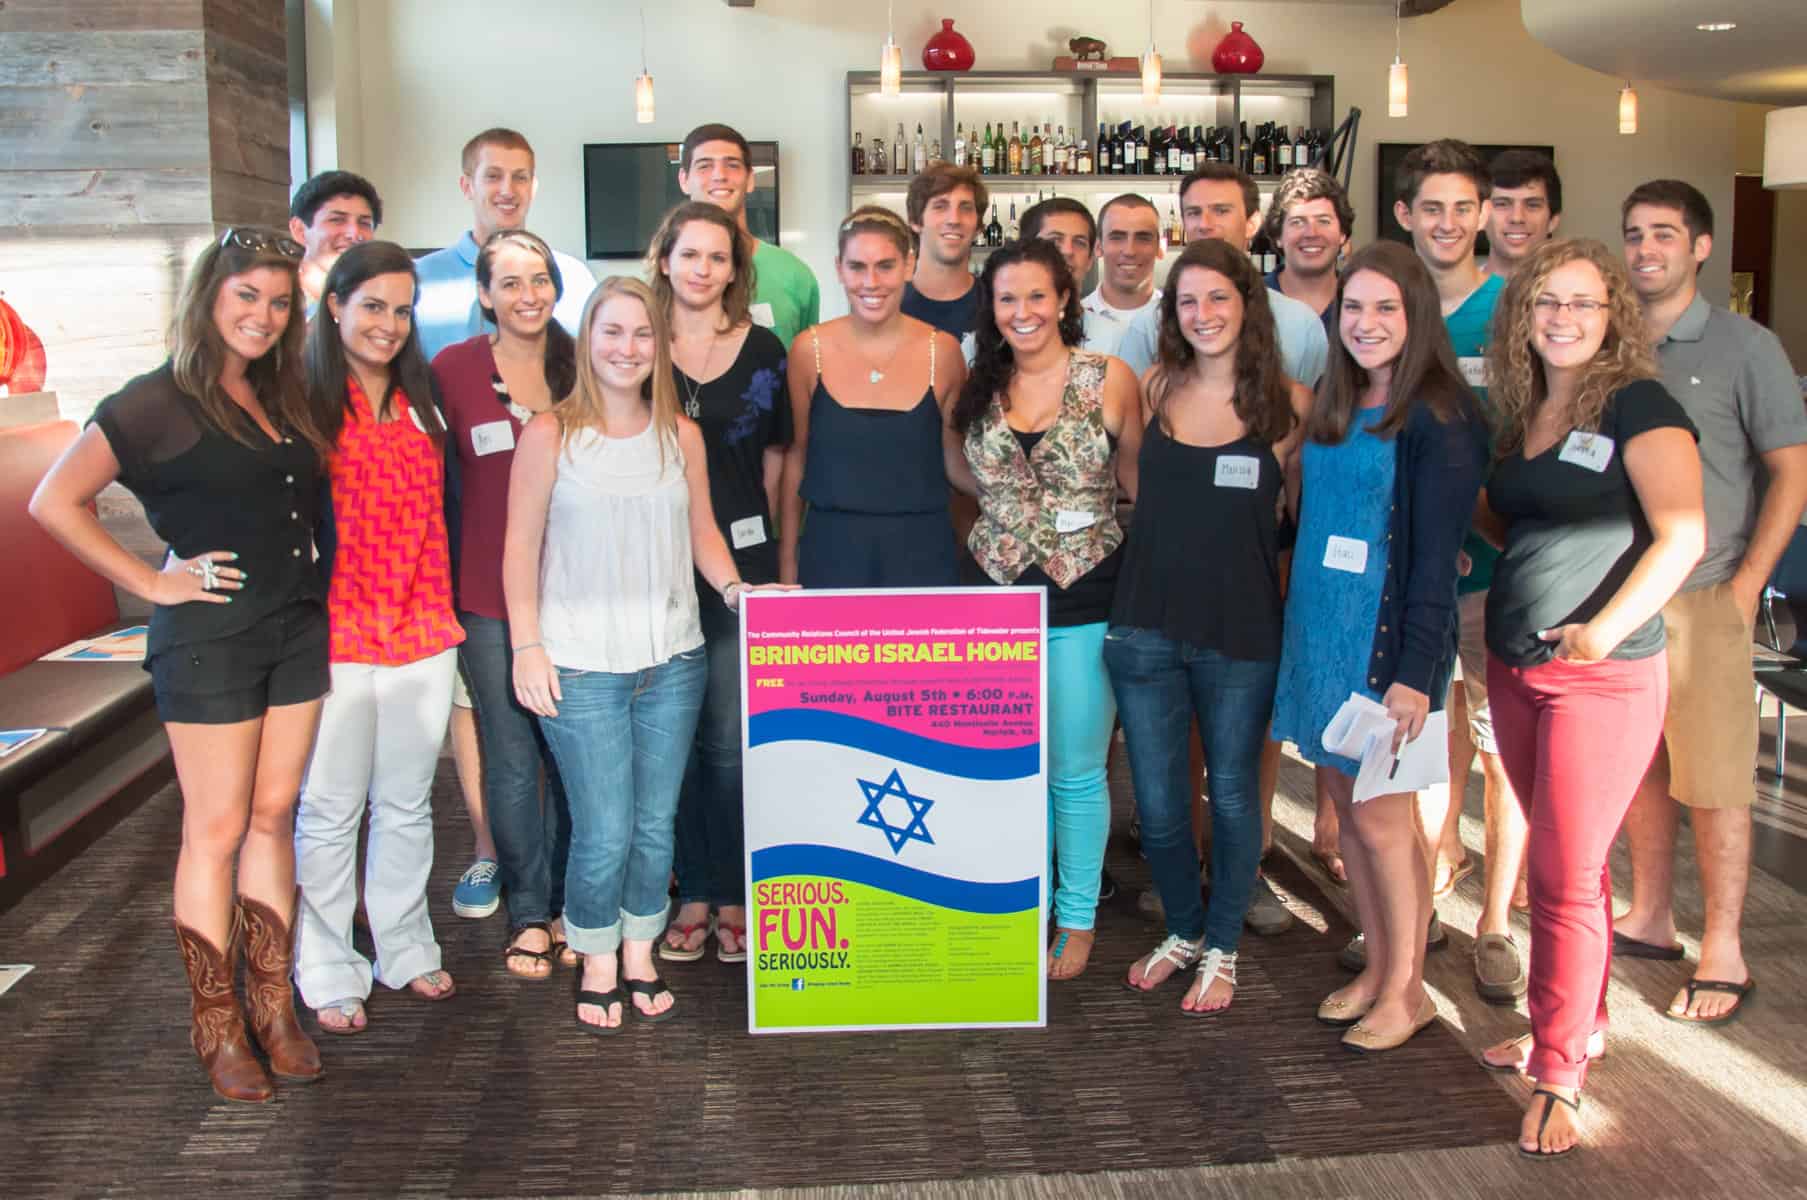 Bringing Israel Home 2012 attendees from universities across the U.S.A. caught up with old friends and made some new friends.